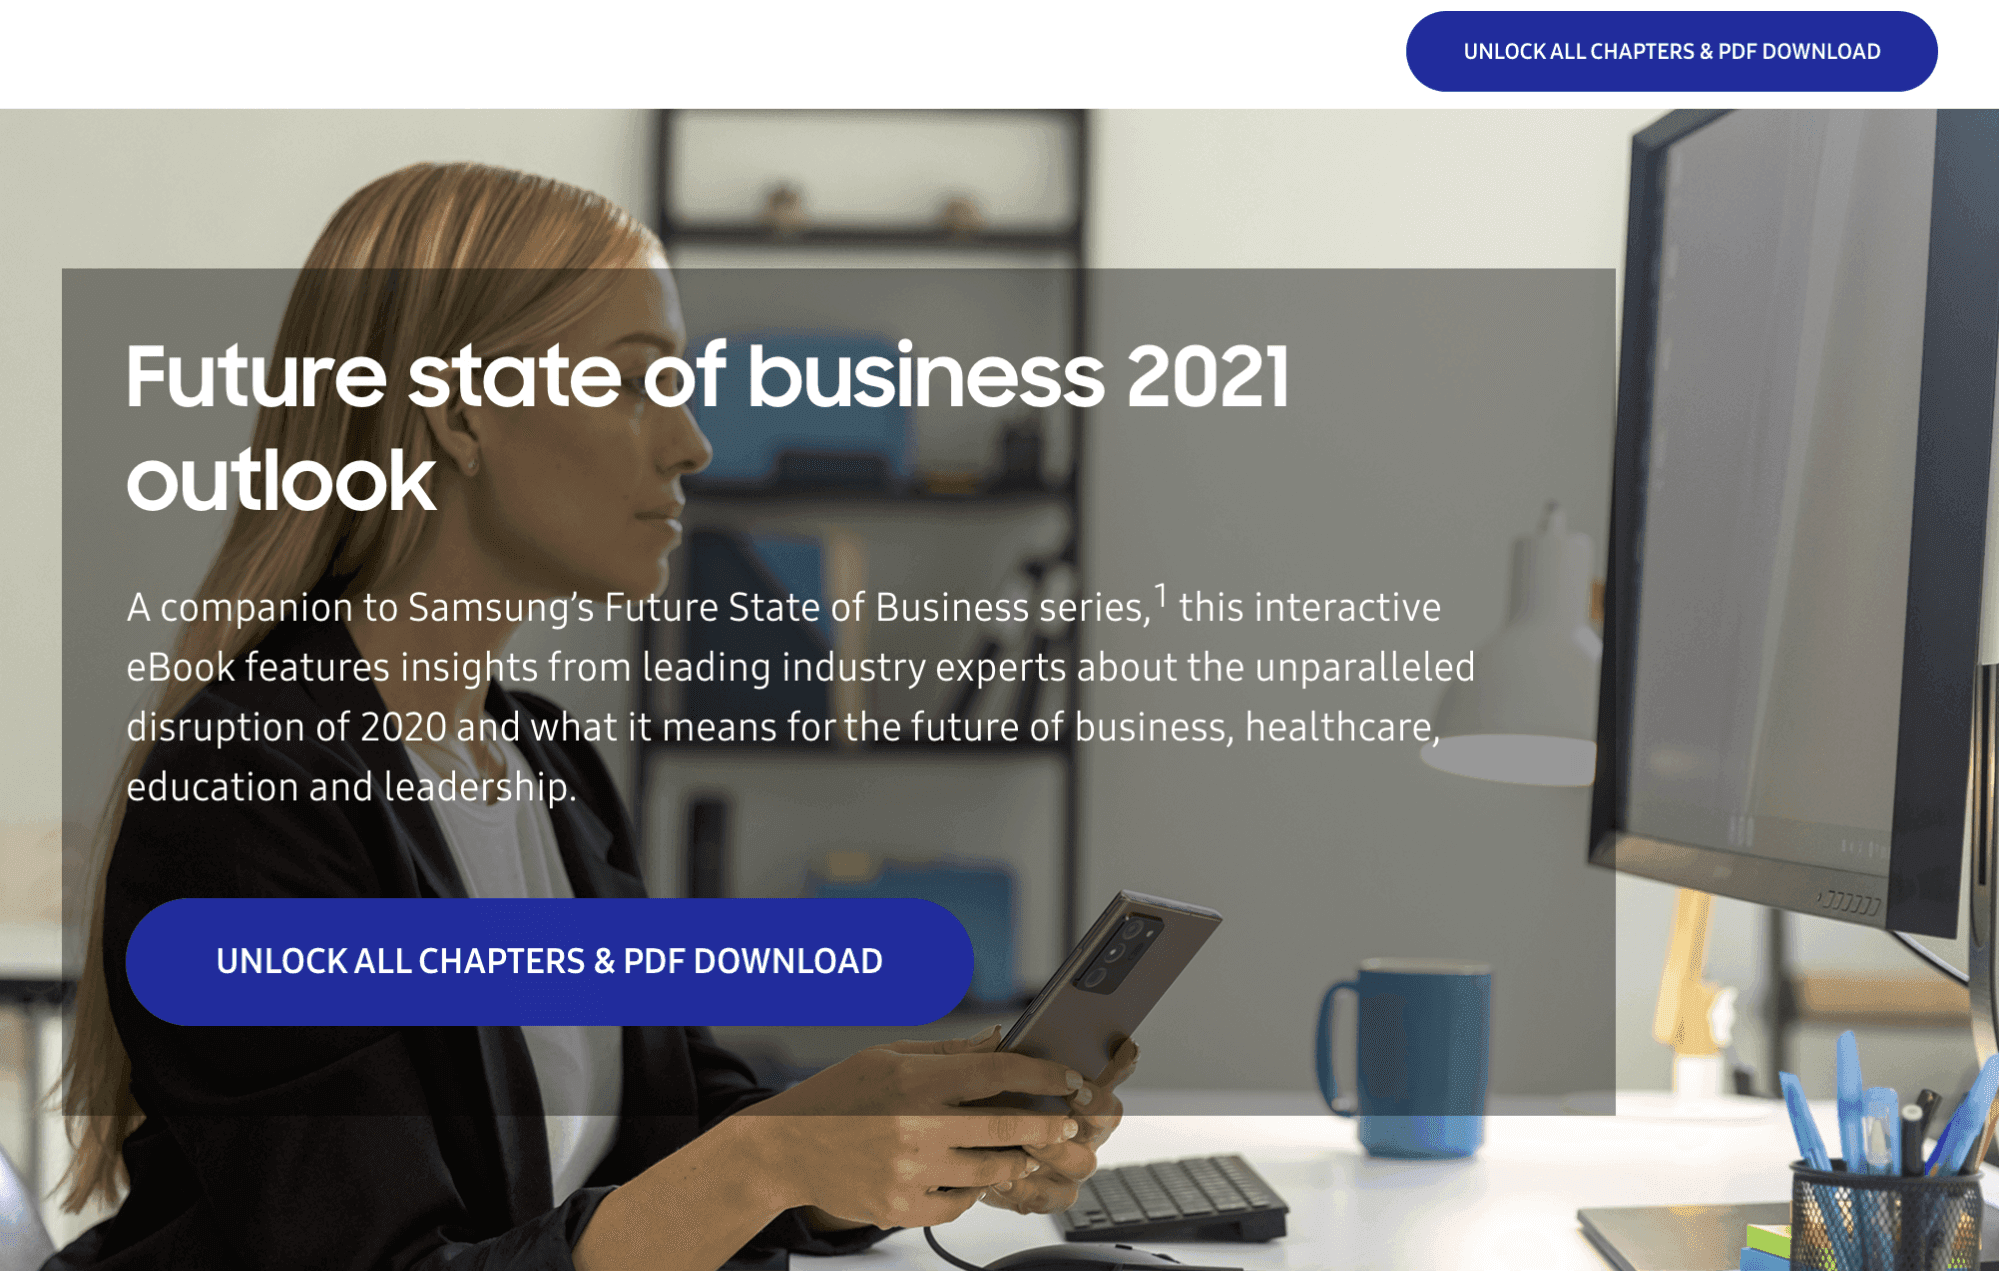 Screenshot from Samsung website of an example of a case study about future state of business